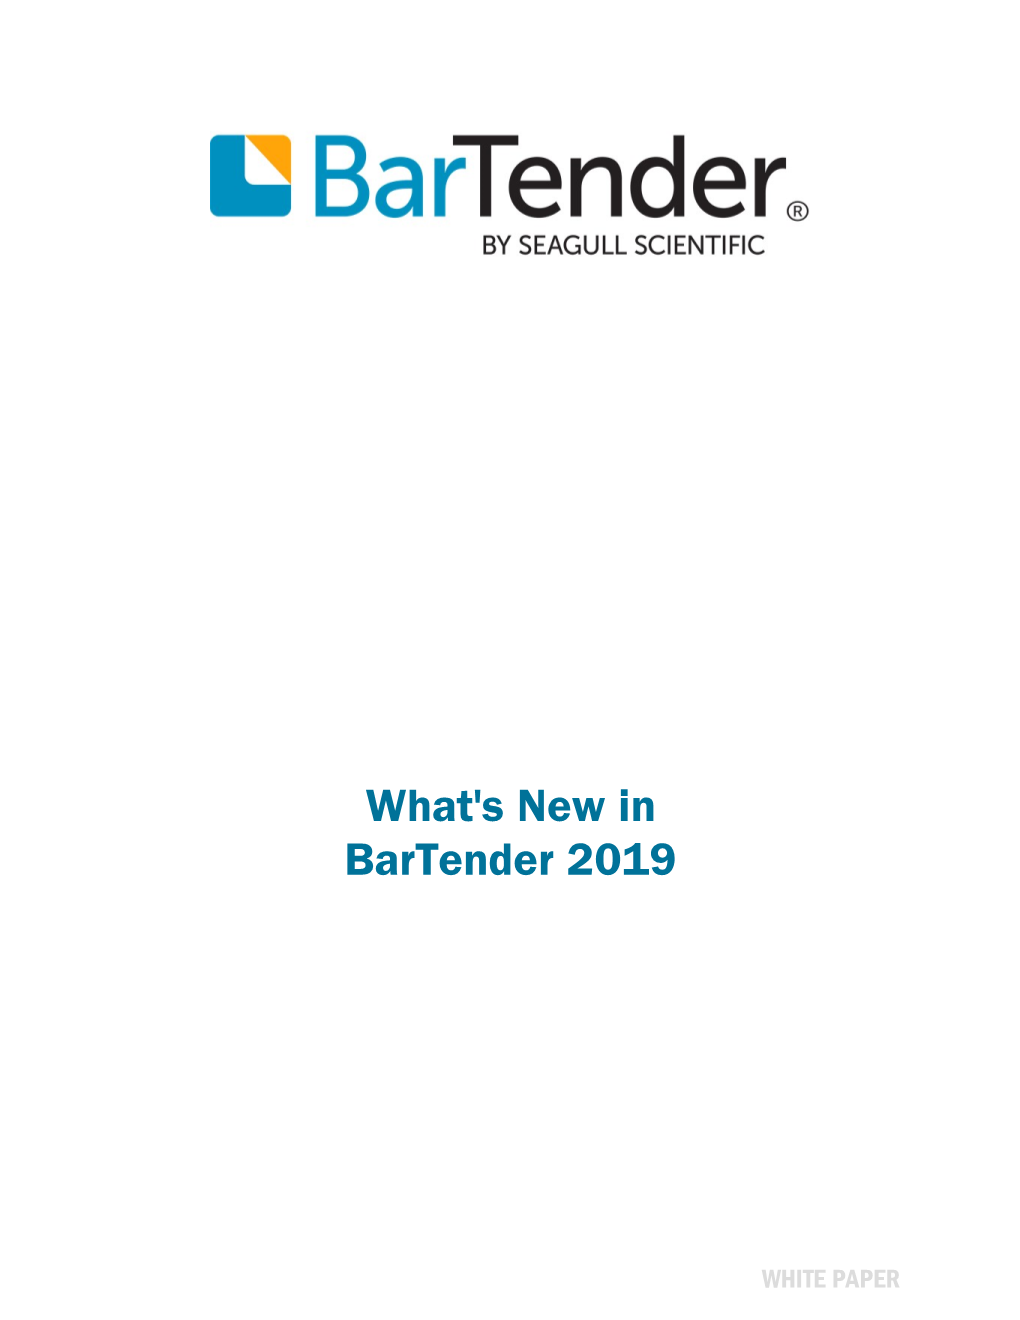 What's New in Bartender 2019